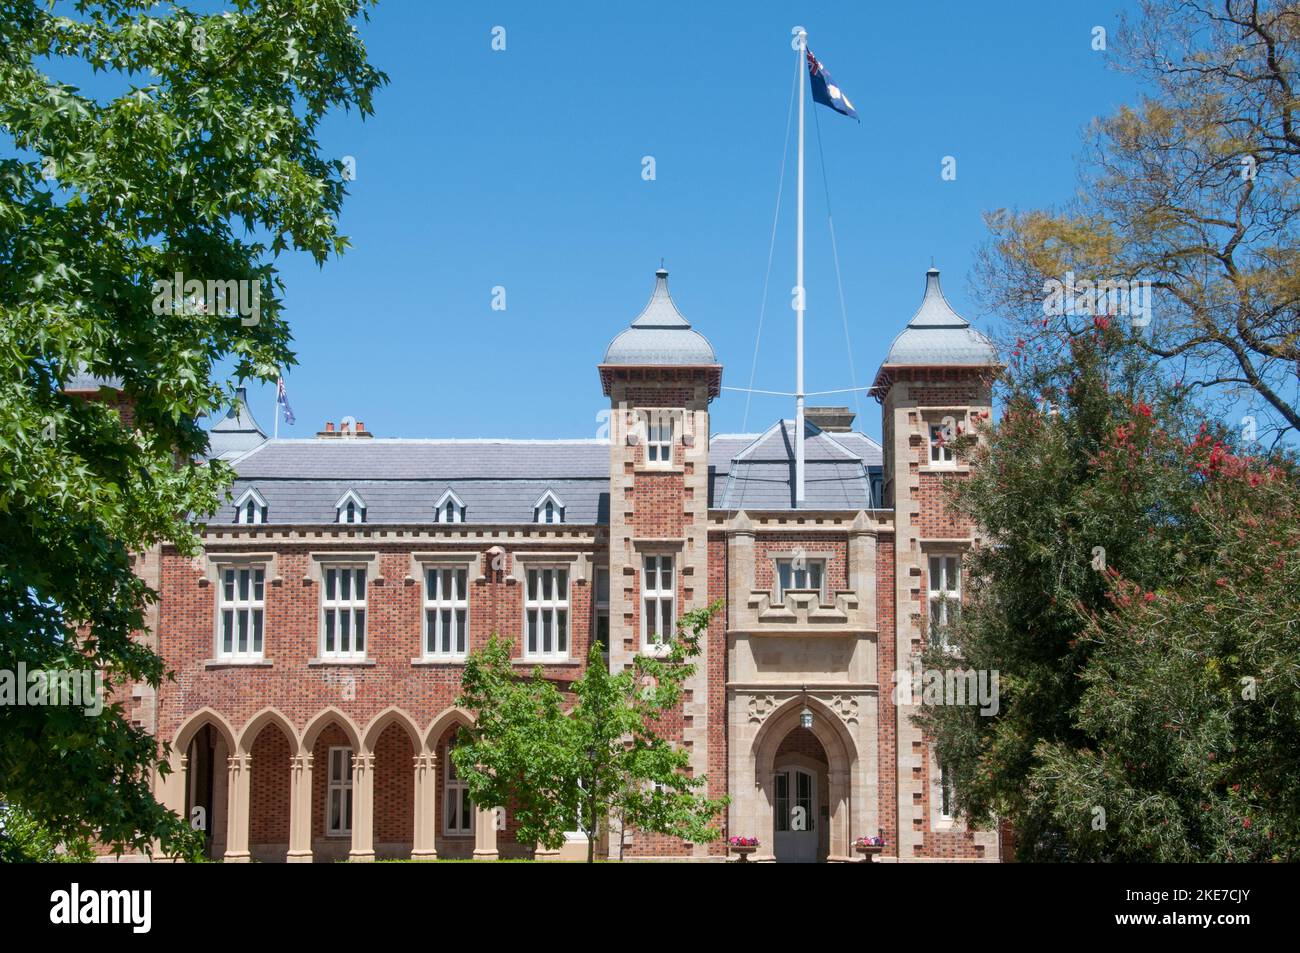 Official residence of the State Governor, Western Australia, Government House (1863) in Perth was designed in the Victorian-era Gothic Revival style. Stock Photo